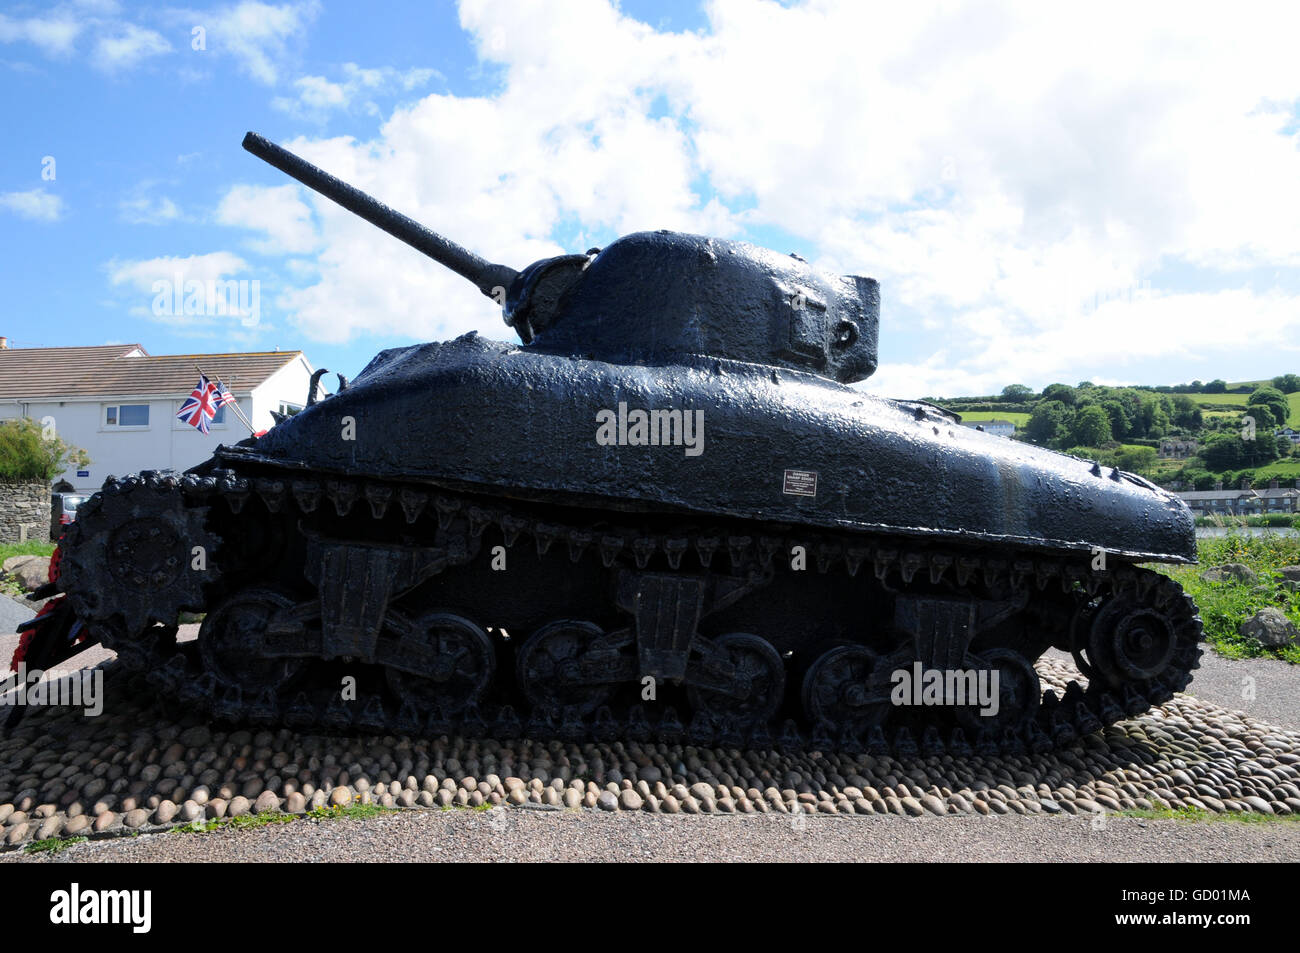 An America WW2 Sherman tank on display at Slapton Sands, Devon, England. The tank was lost in the sea during a pratice fpr the D Day landings in 1944. Stock Photo